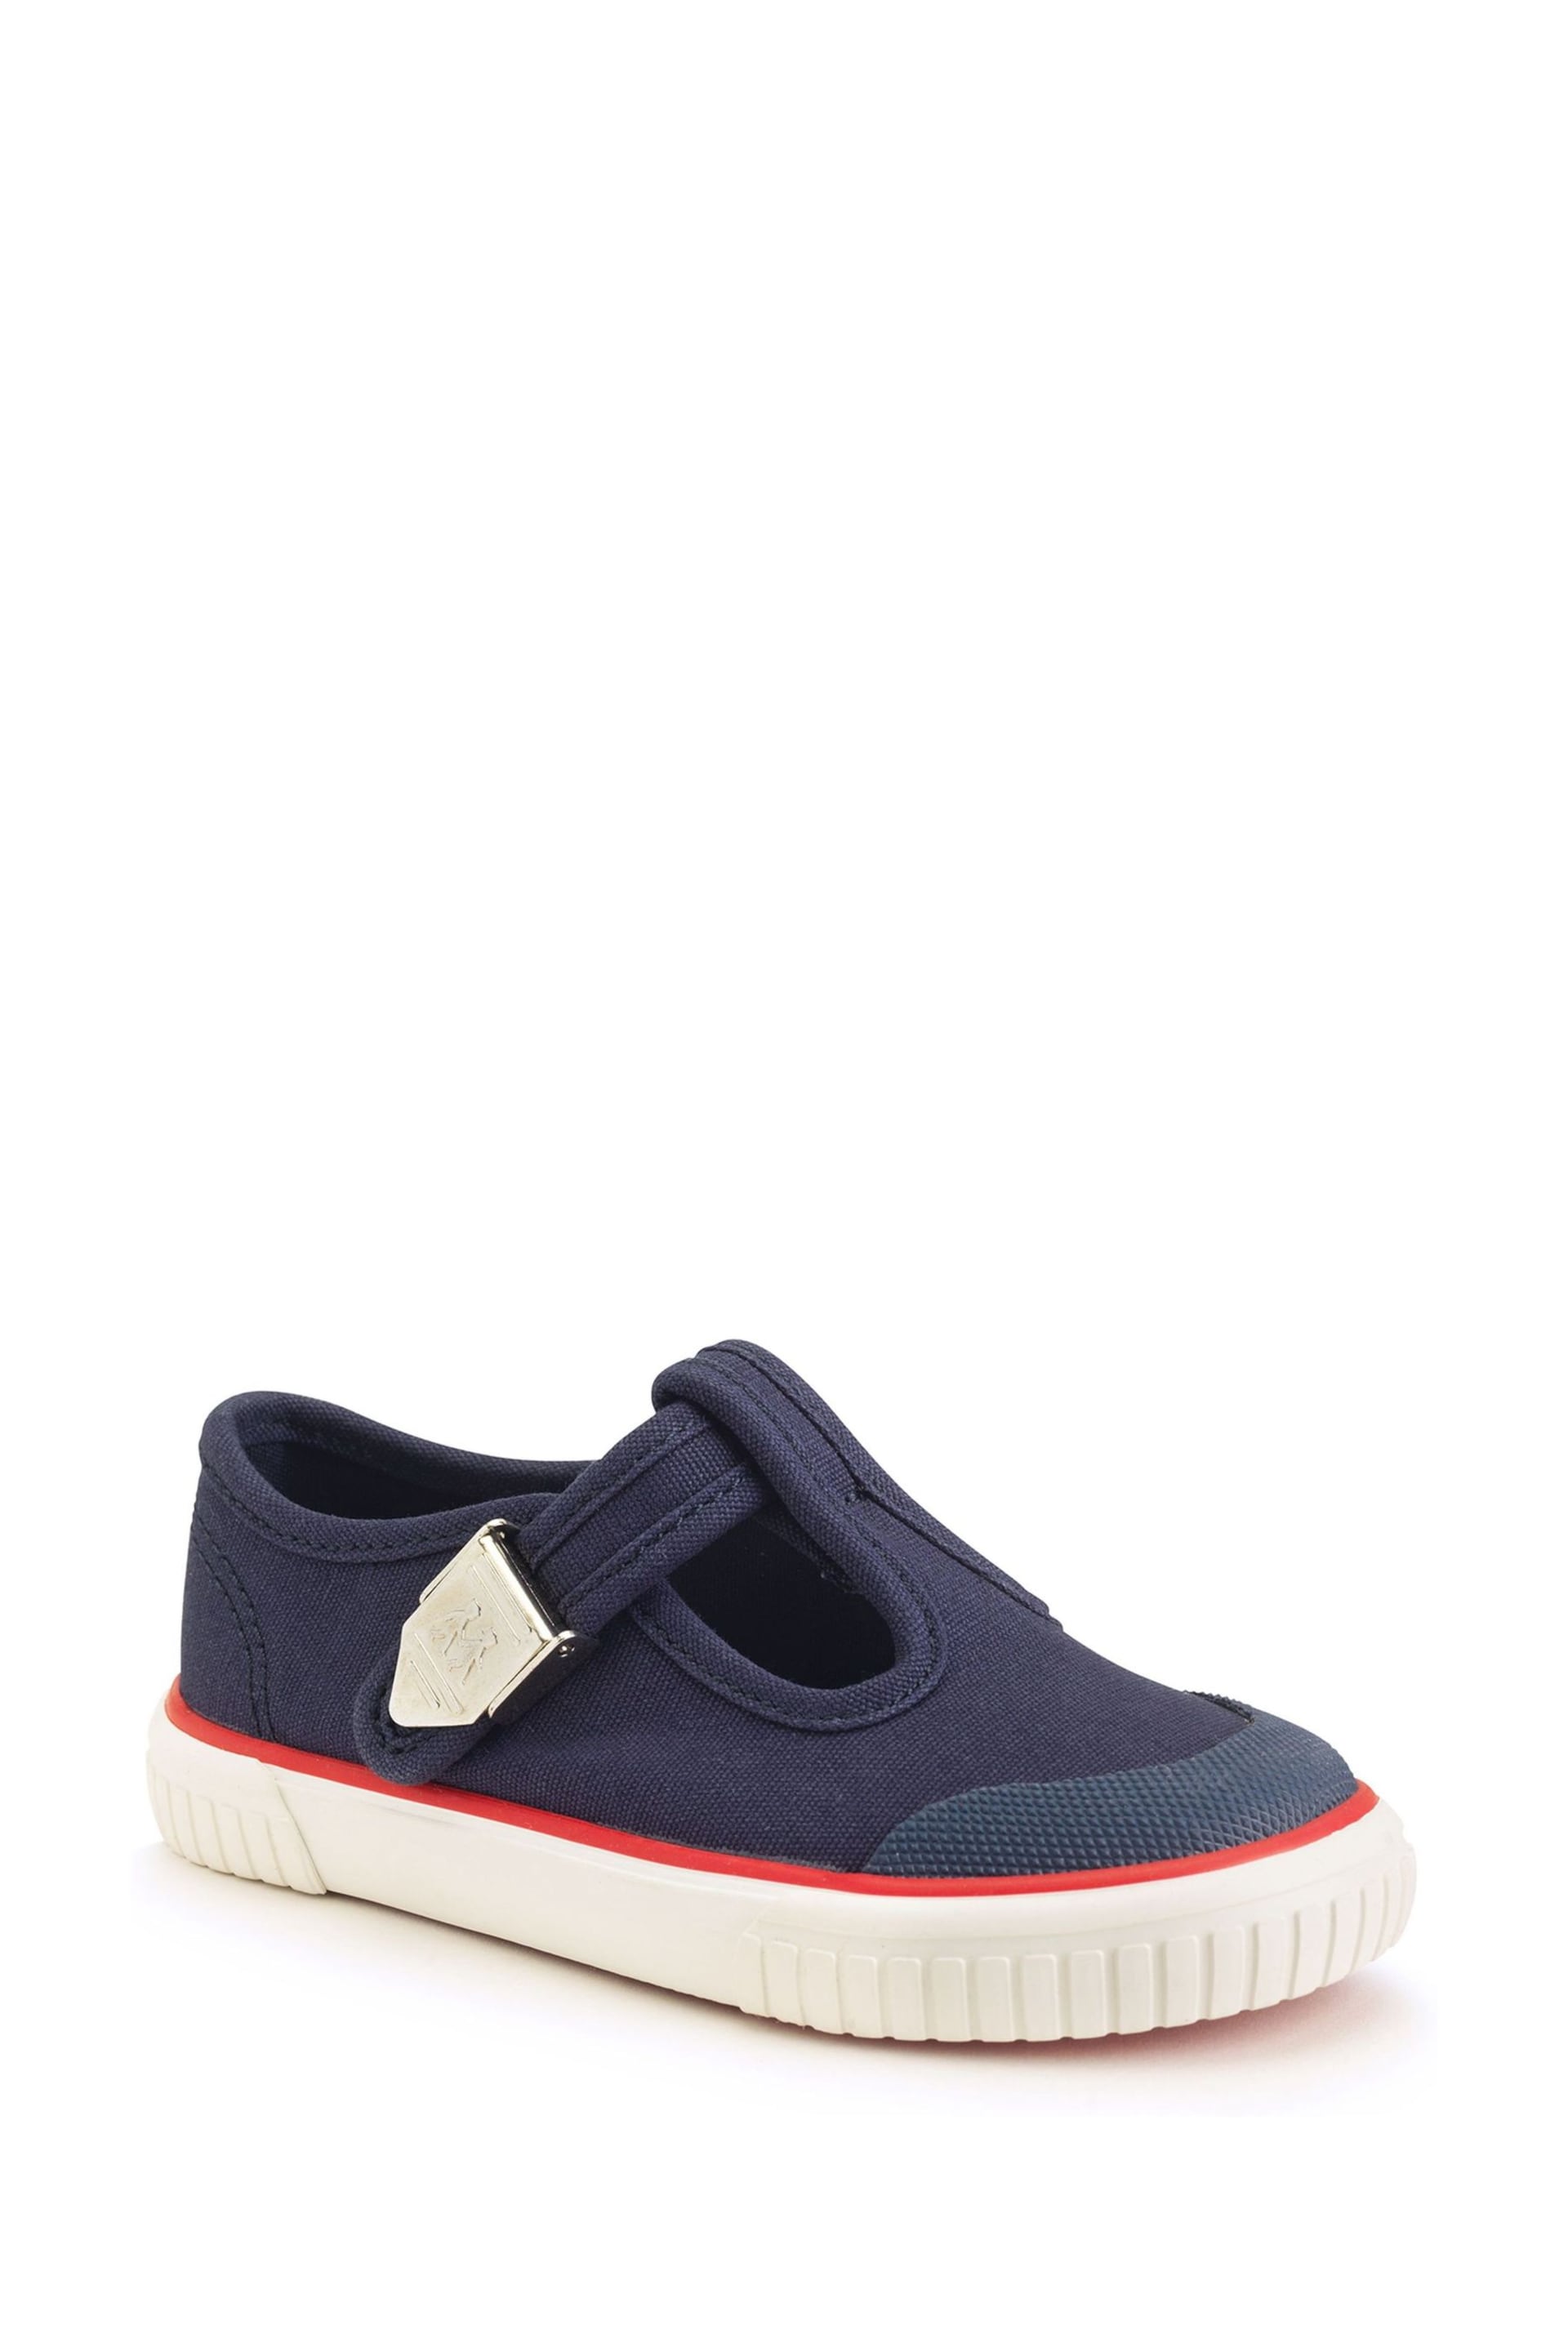 Start Rite Blue Anchor Washable Canvas T-Bar Summer Shoes - Image 2 of 6